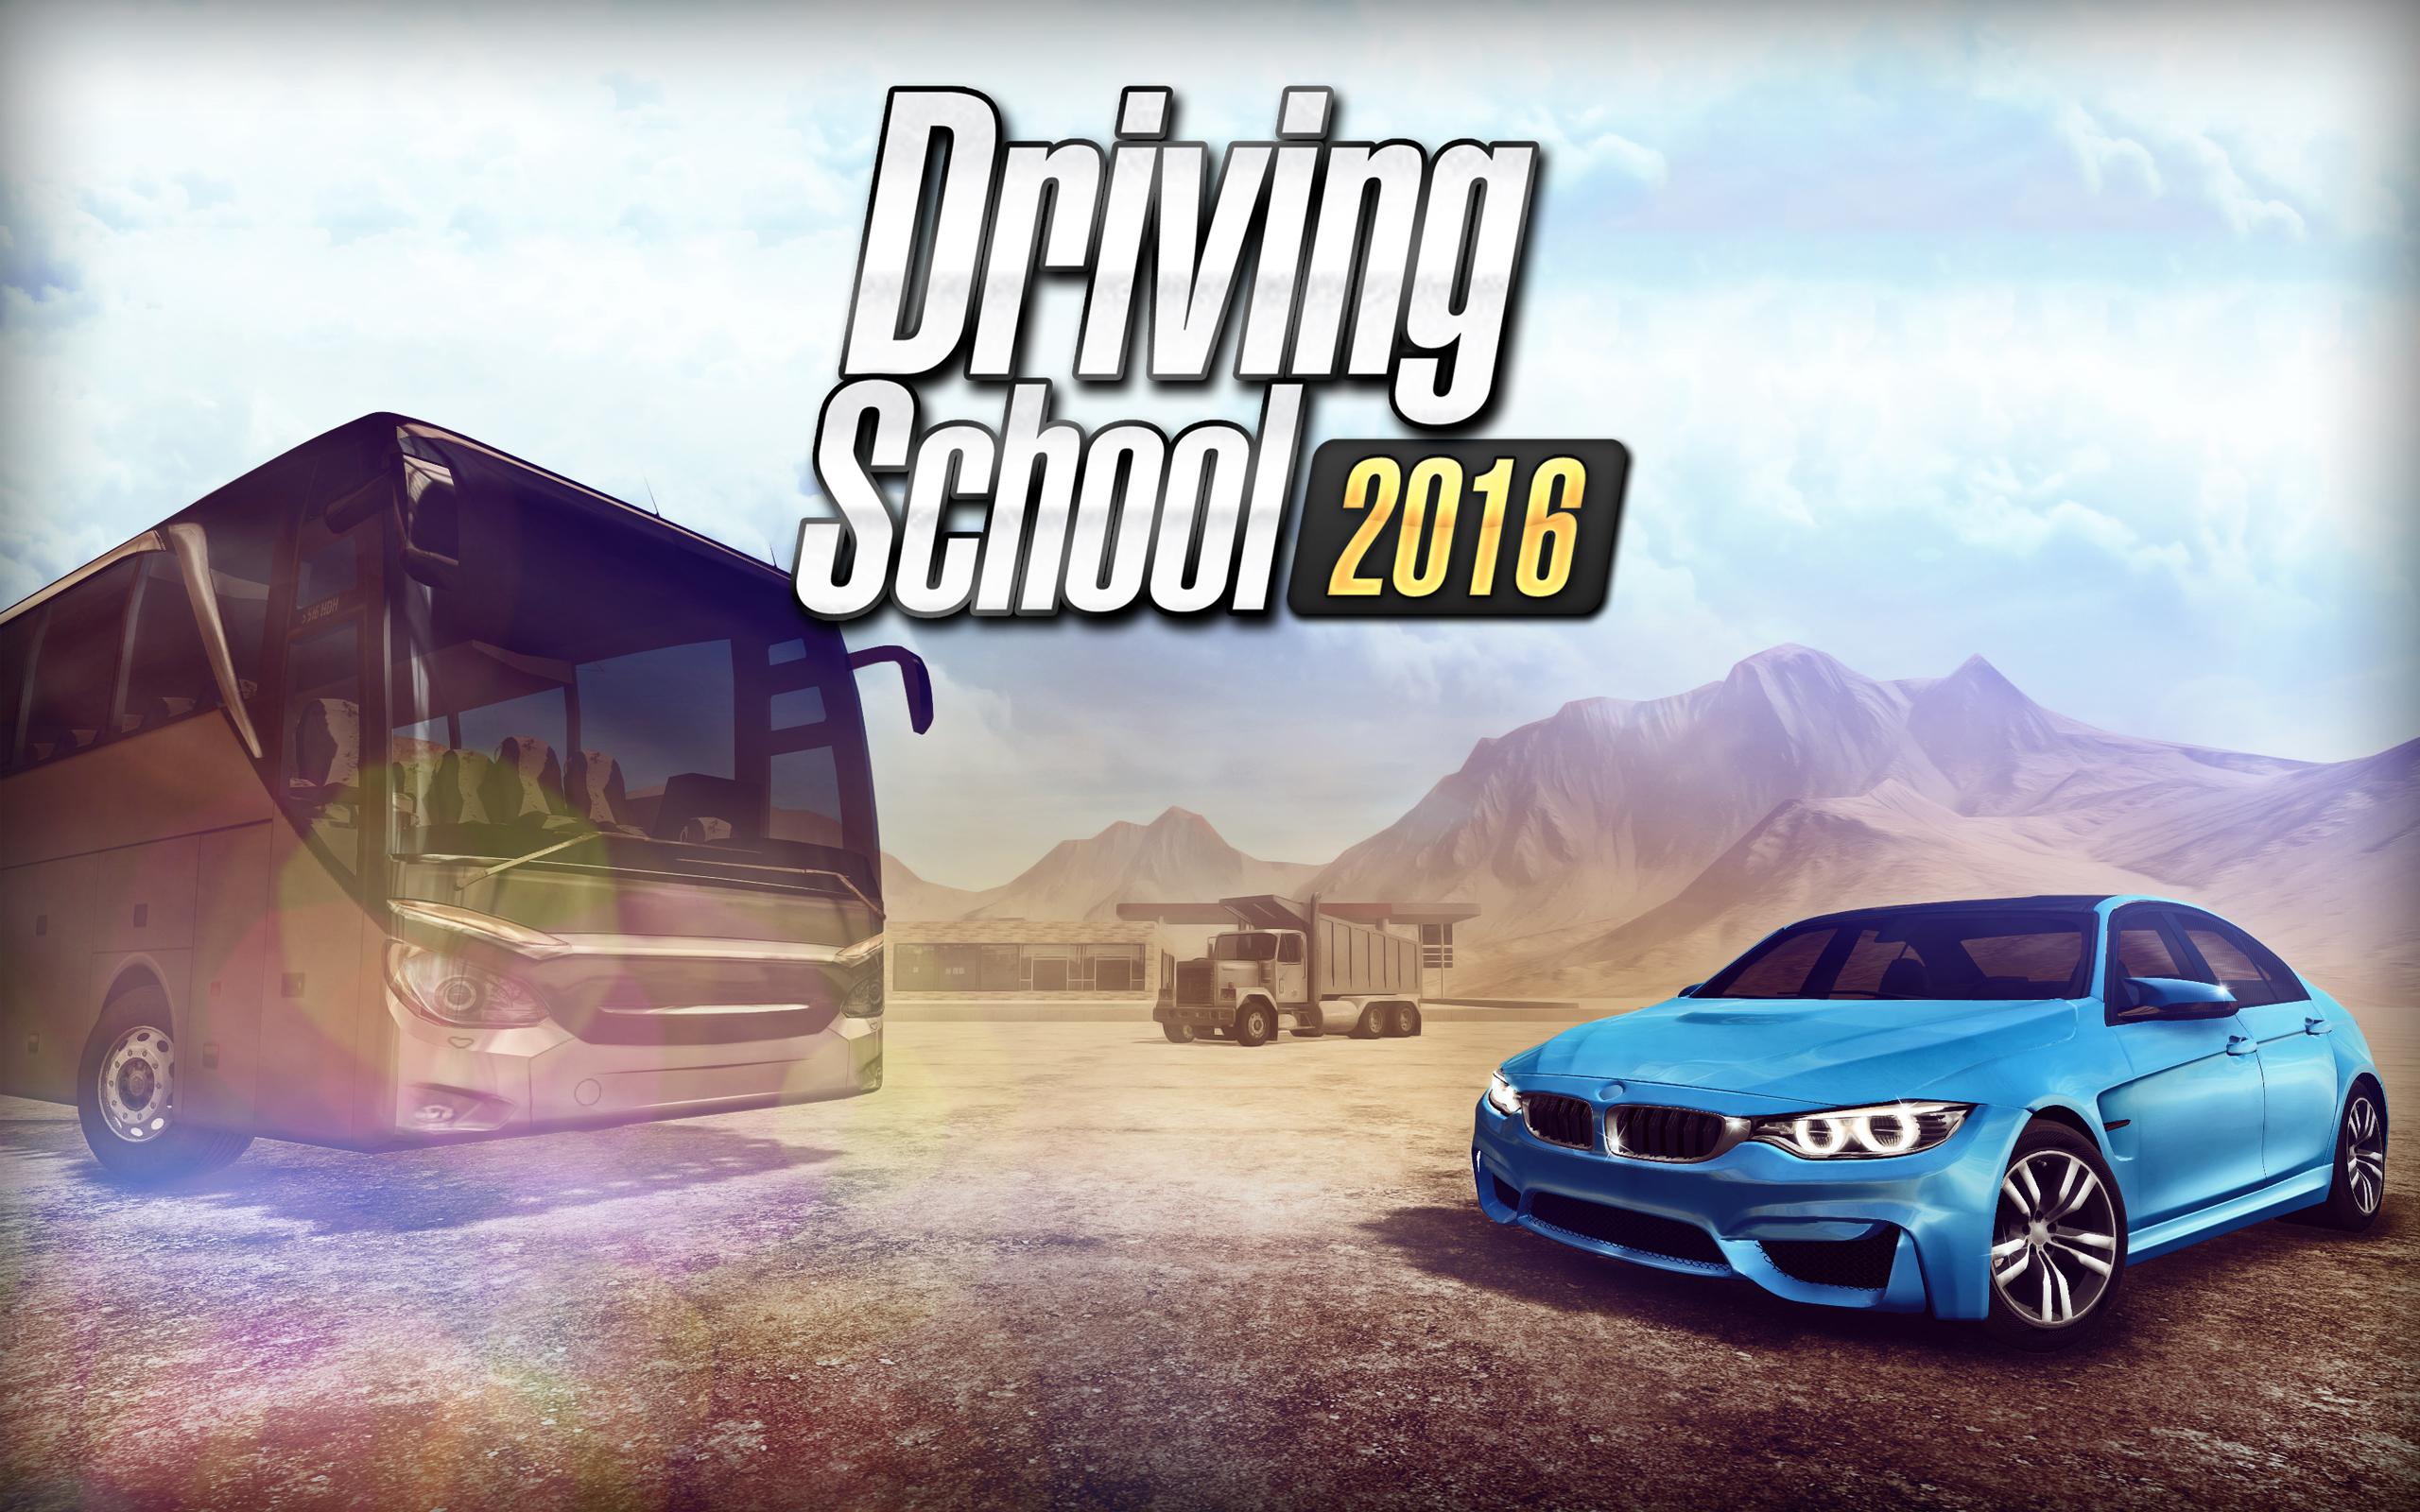 Driving School 2016 for Android - APK Download - 